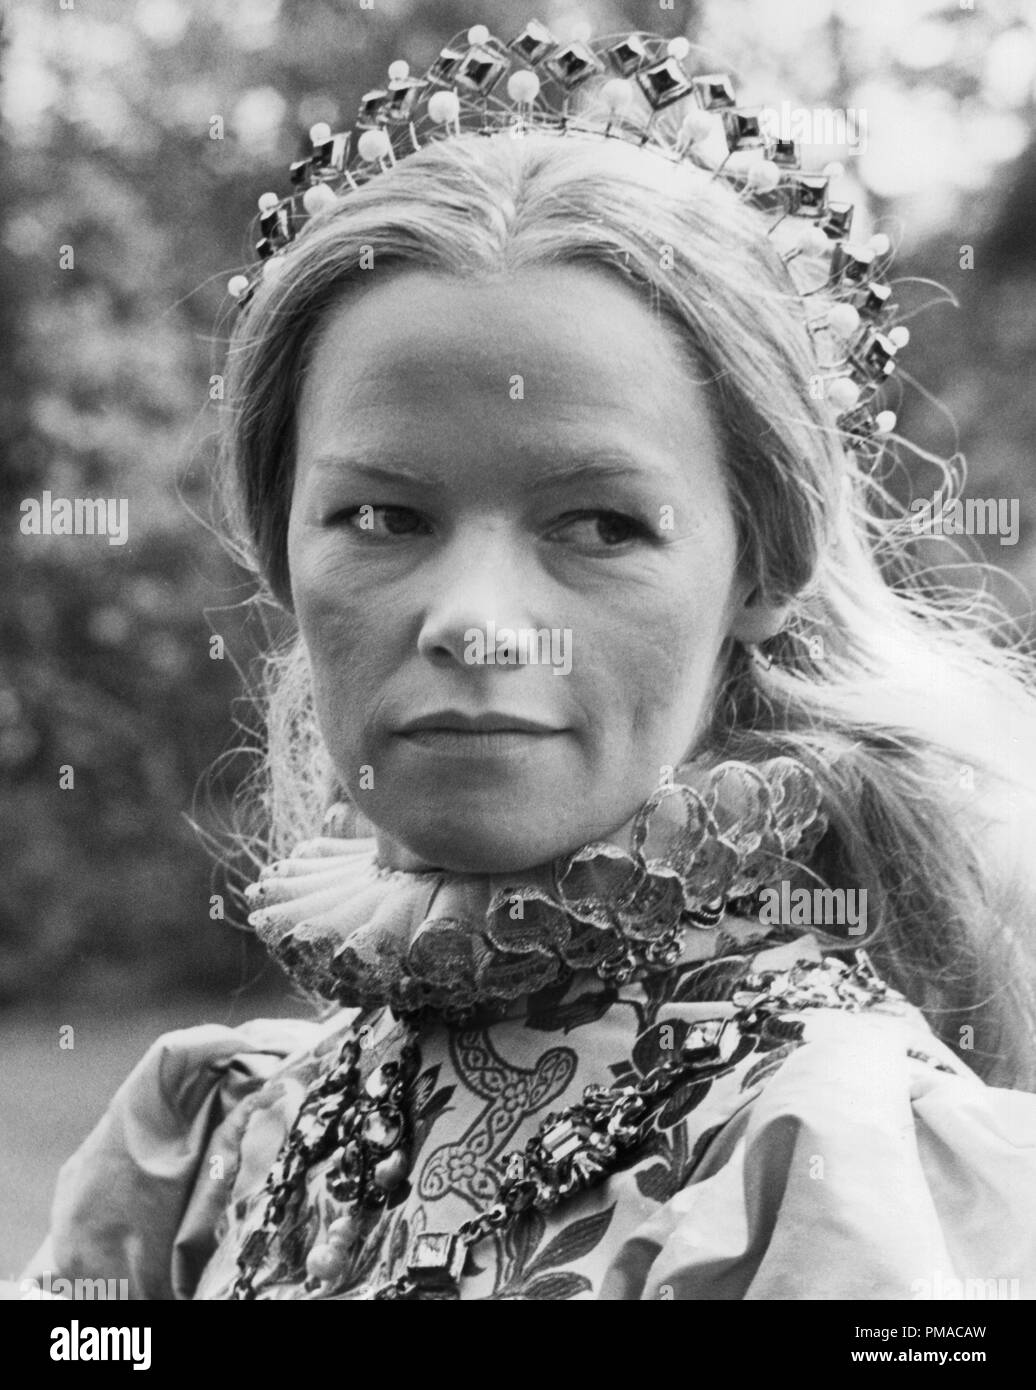 Glenda Jackson in character for her role as Elizabeth the first in 'Mary, Queen of Scots', 1971 Universal File Reference # 32368 106THA Stock Photo